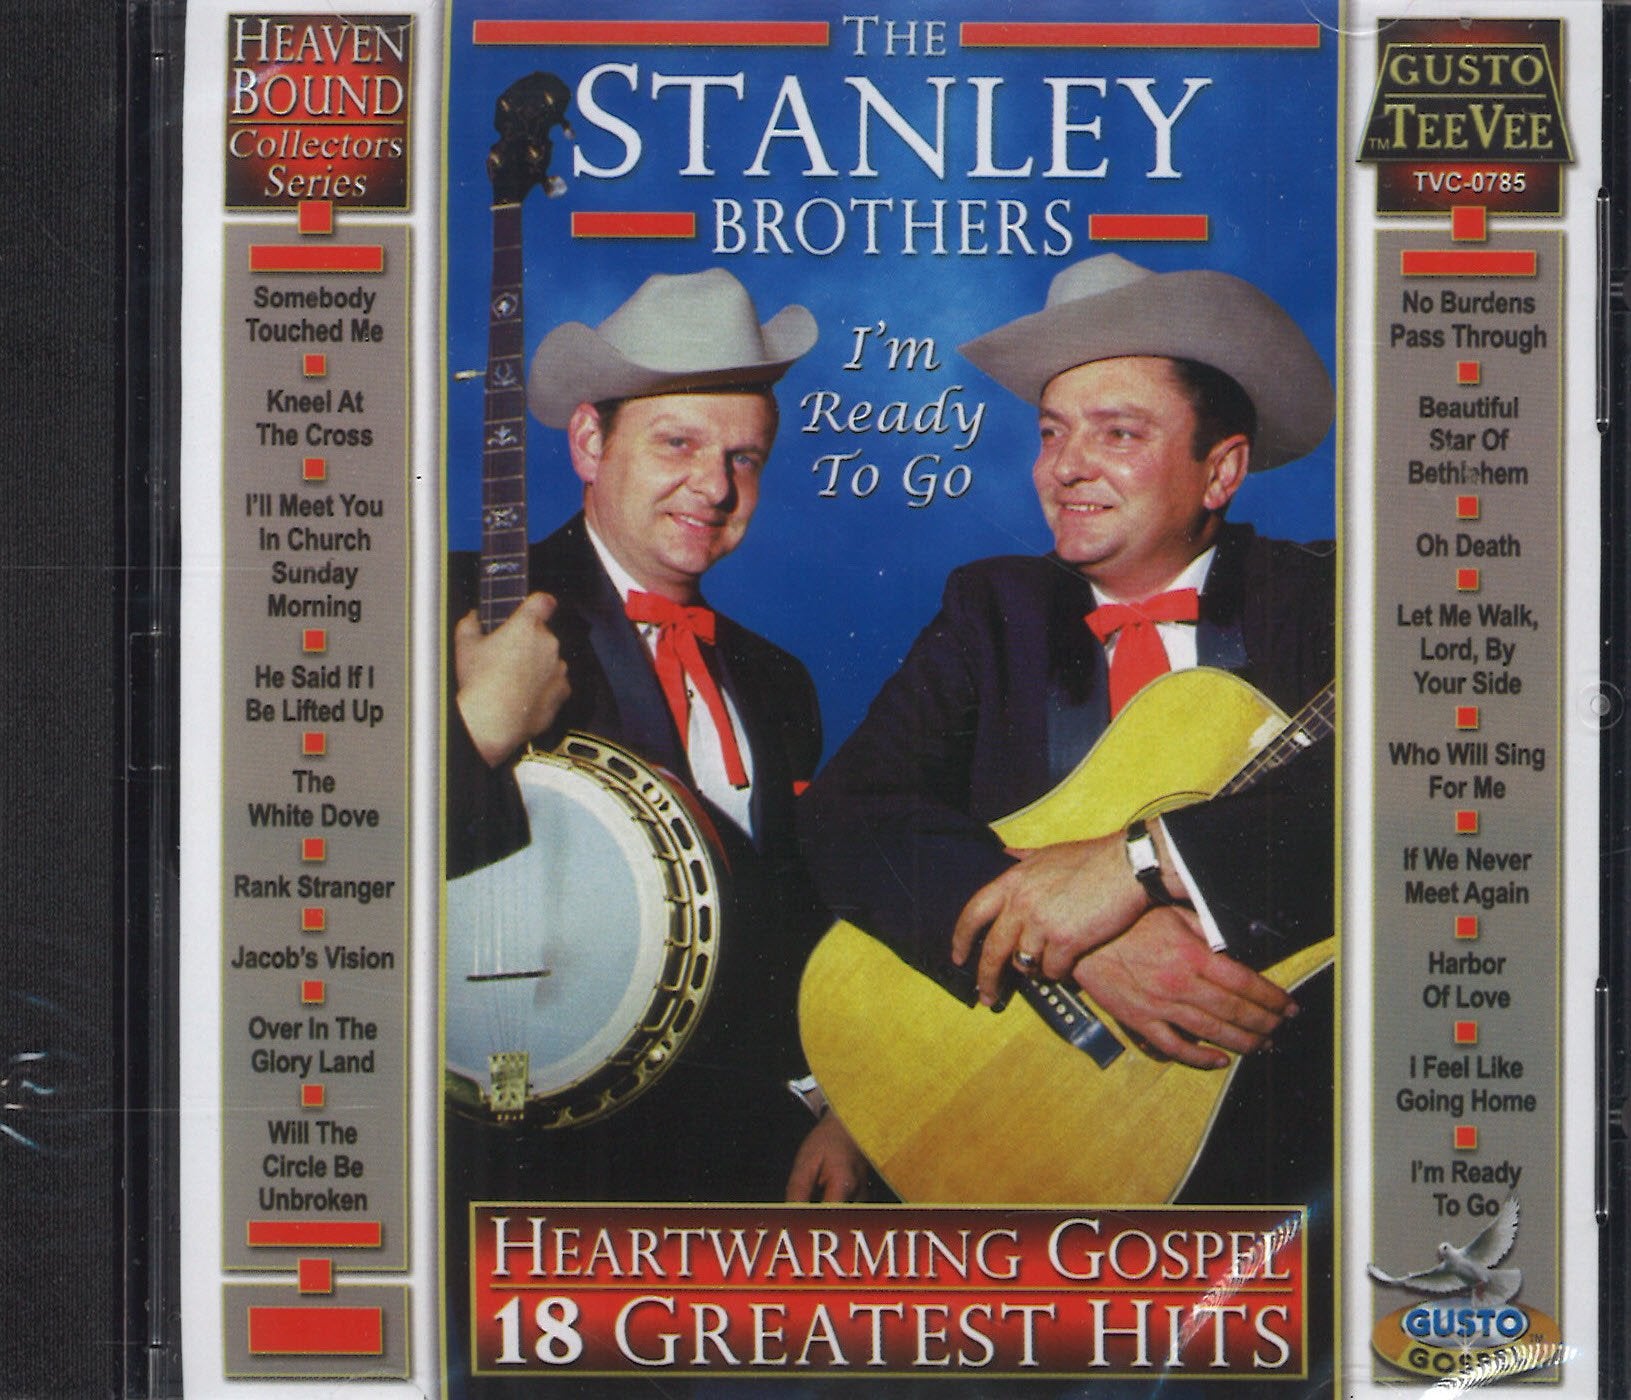 The Stanley Brothers Heartwarming Gospel - 18 Greatest Hits